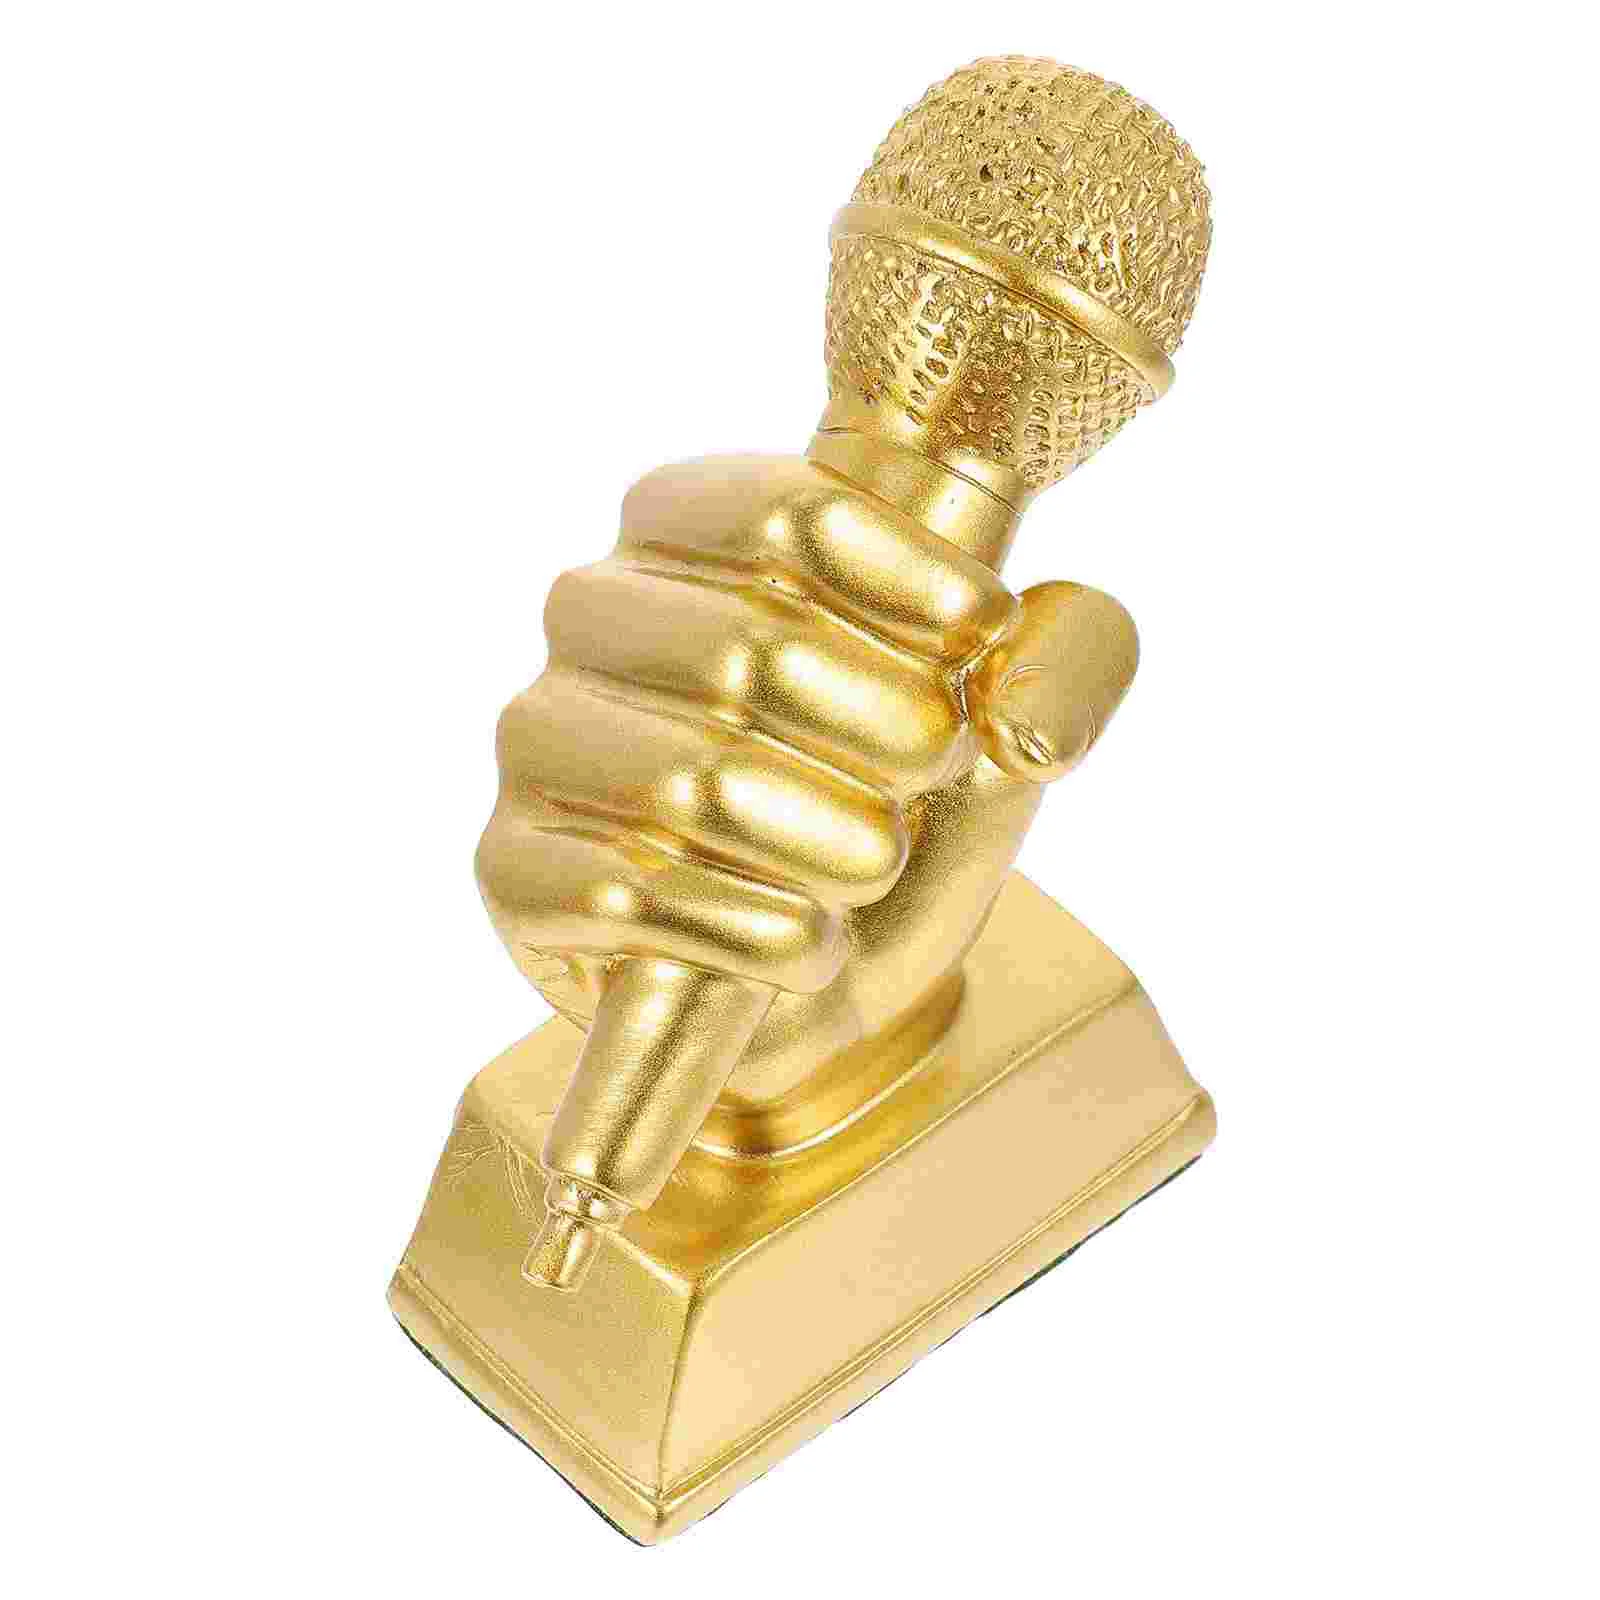 

Trophy Microphone Award Singing Party Music Favors Awards Decor Trophies Gold Home Speech Accessory Children Karaoke Small Dance